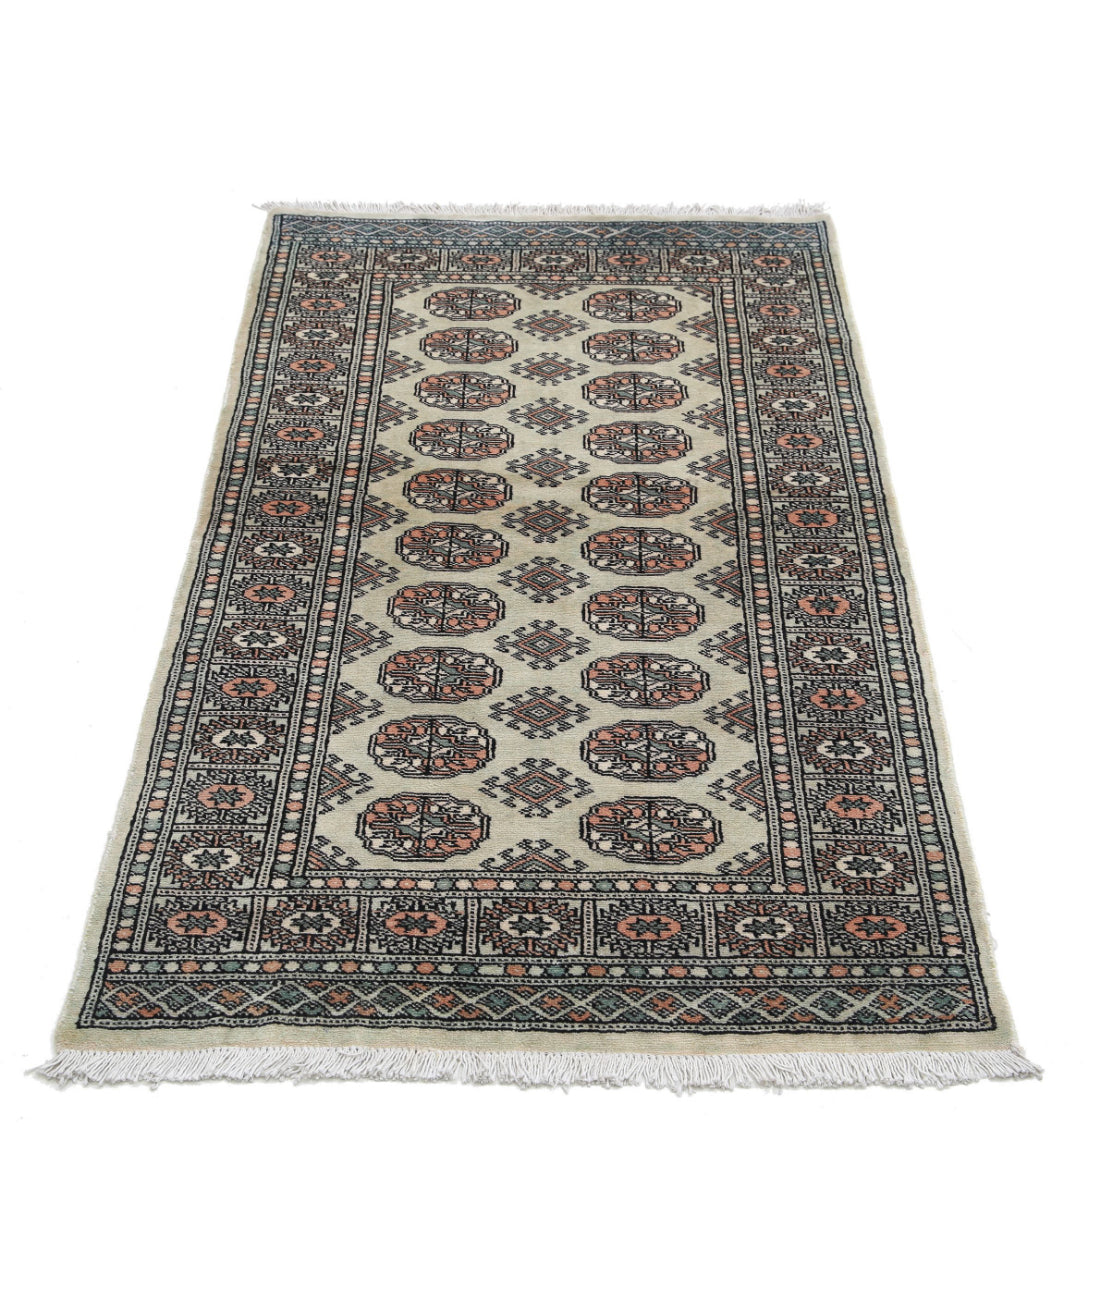 Hand Knotted Tribal Bokhara Wool Rug - 2'11'' x 5'0'' 2'11'' x 5'0'' (88 X 150) / Grey / Ivory